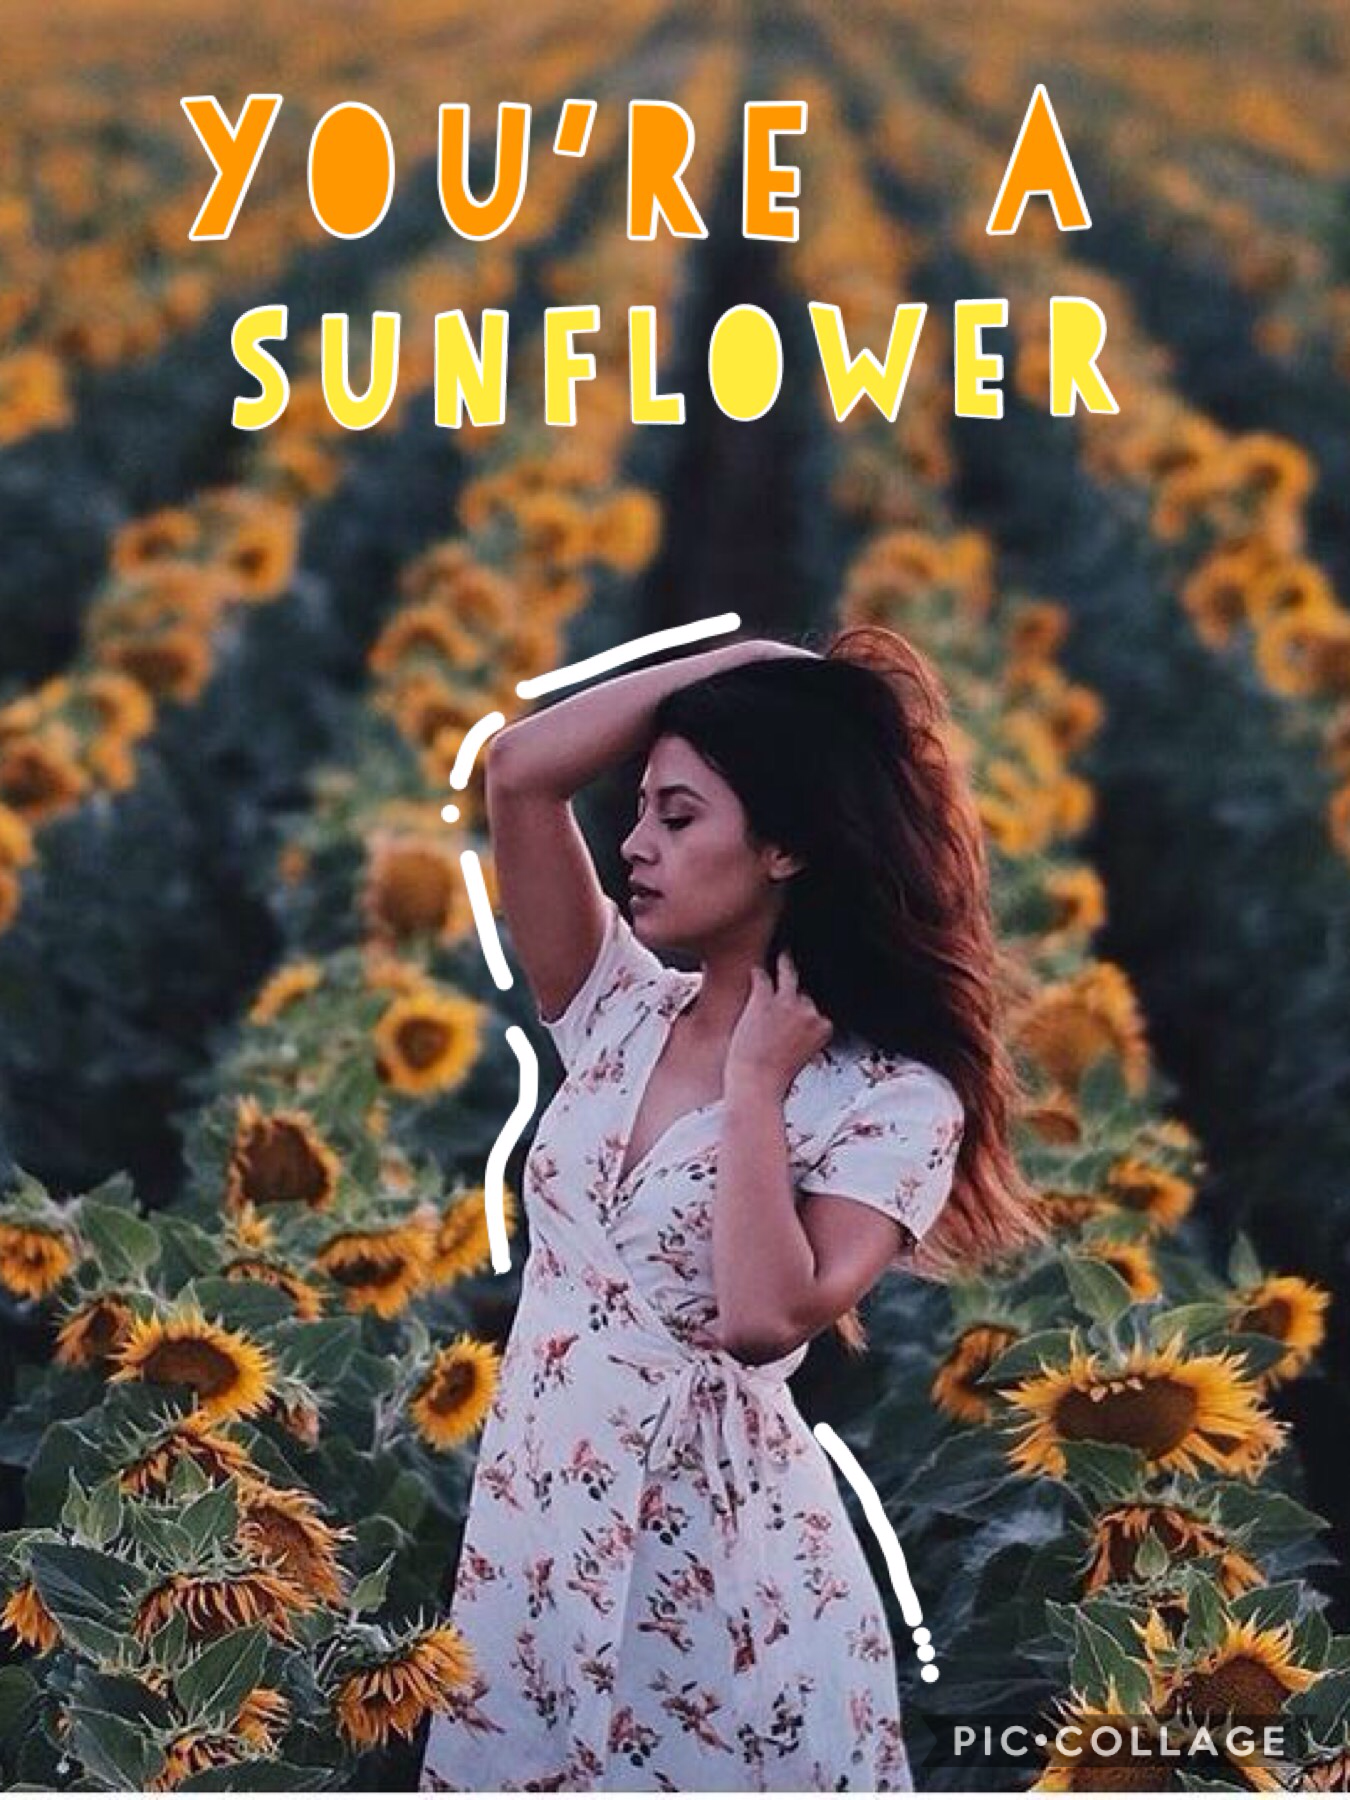 Sunflower By Post Malone and Swae Lee 
Now one of my favorite song 